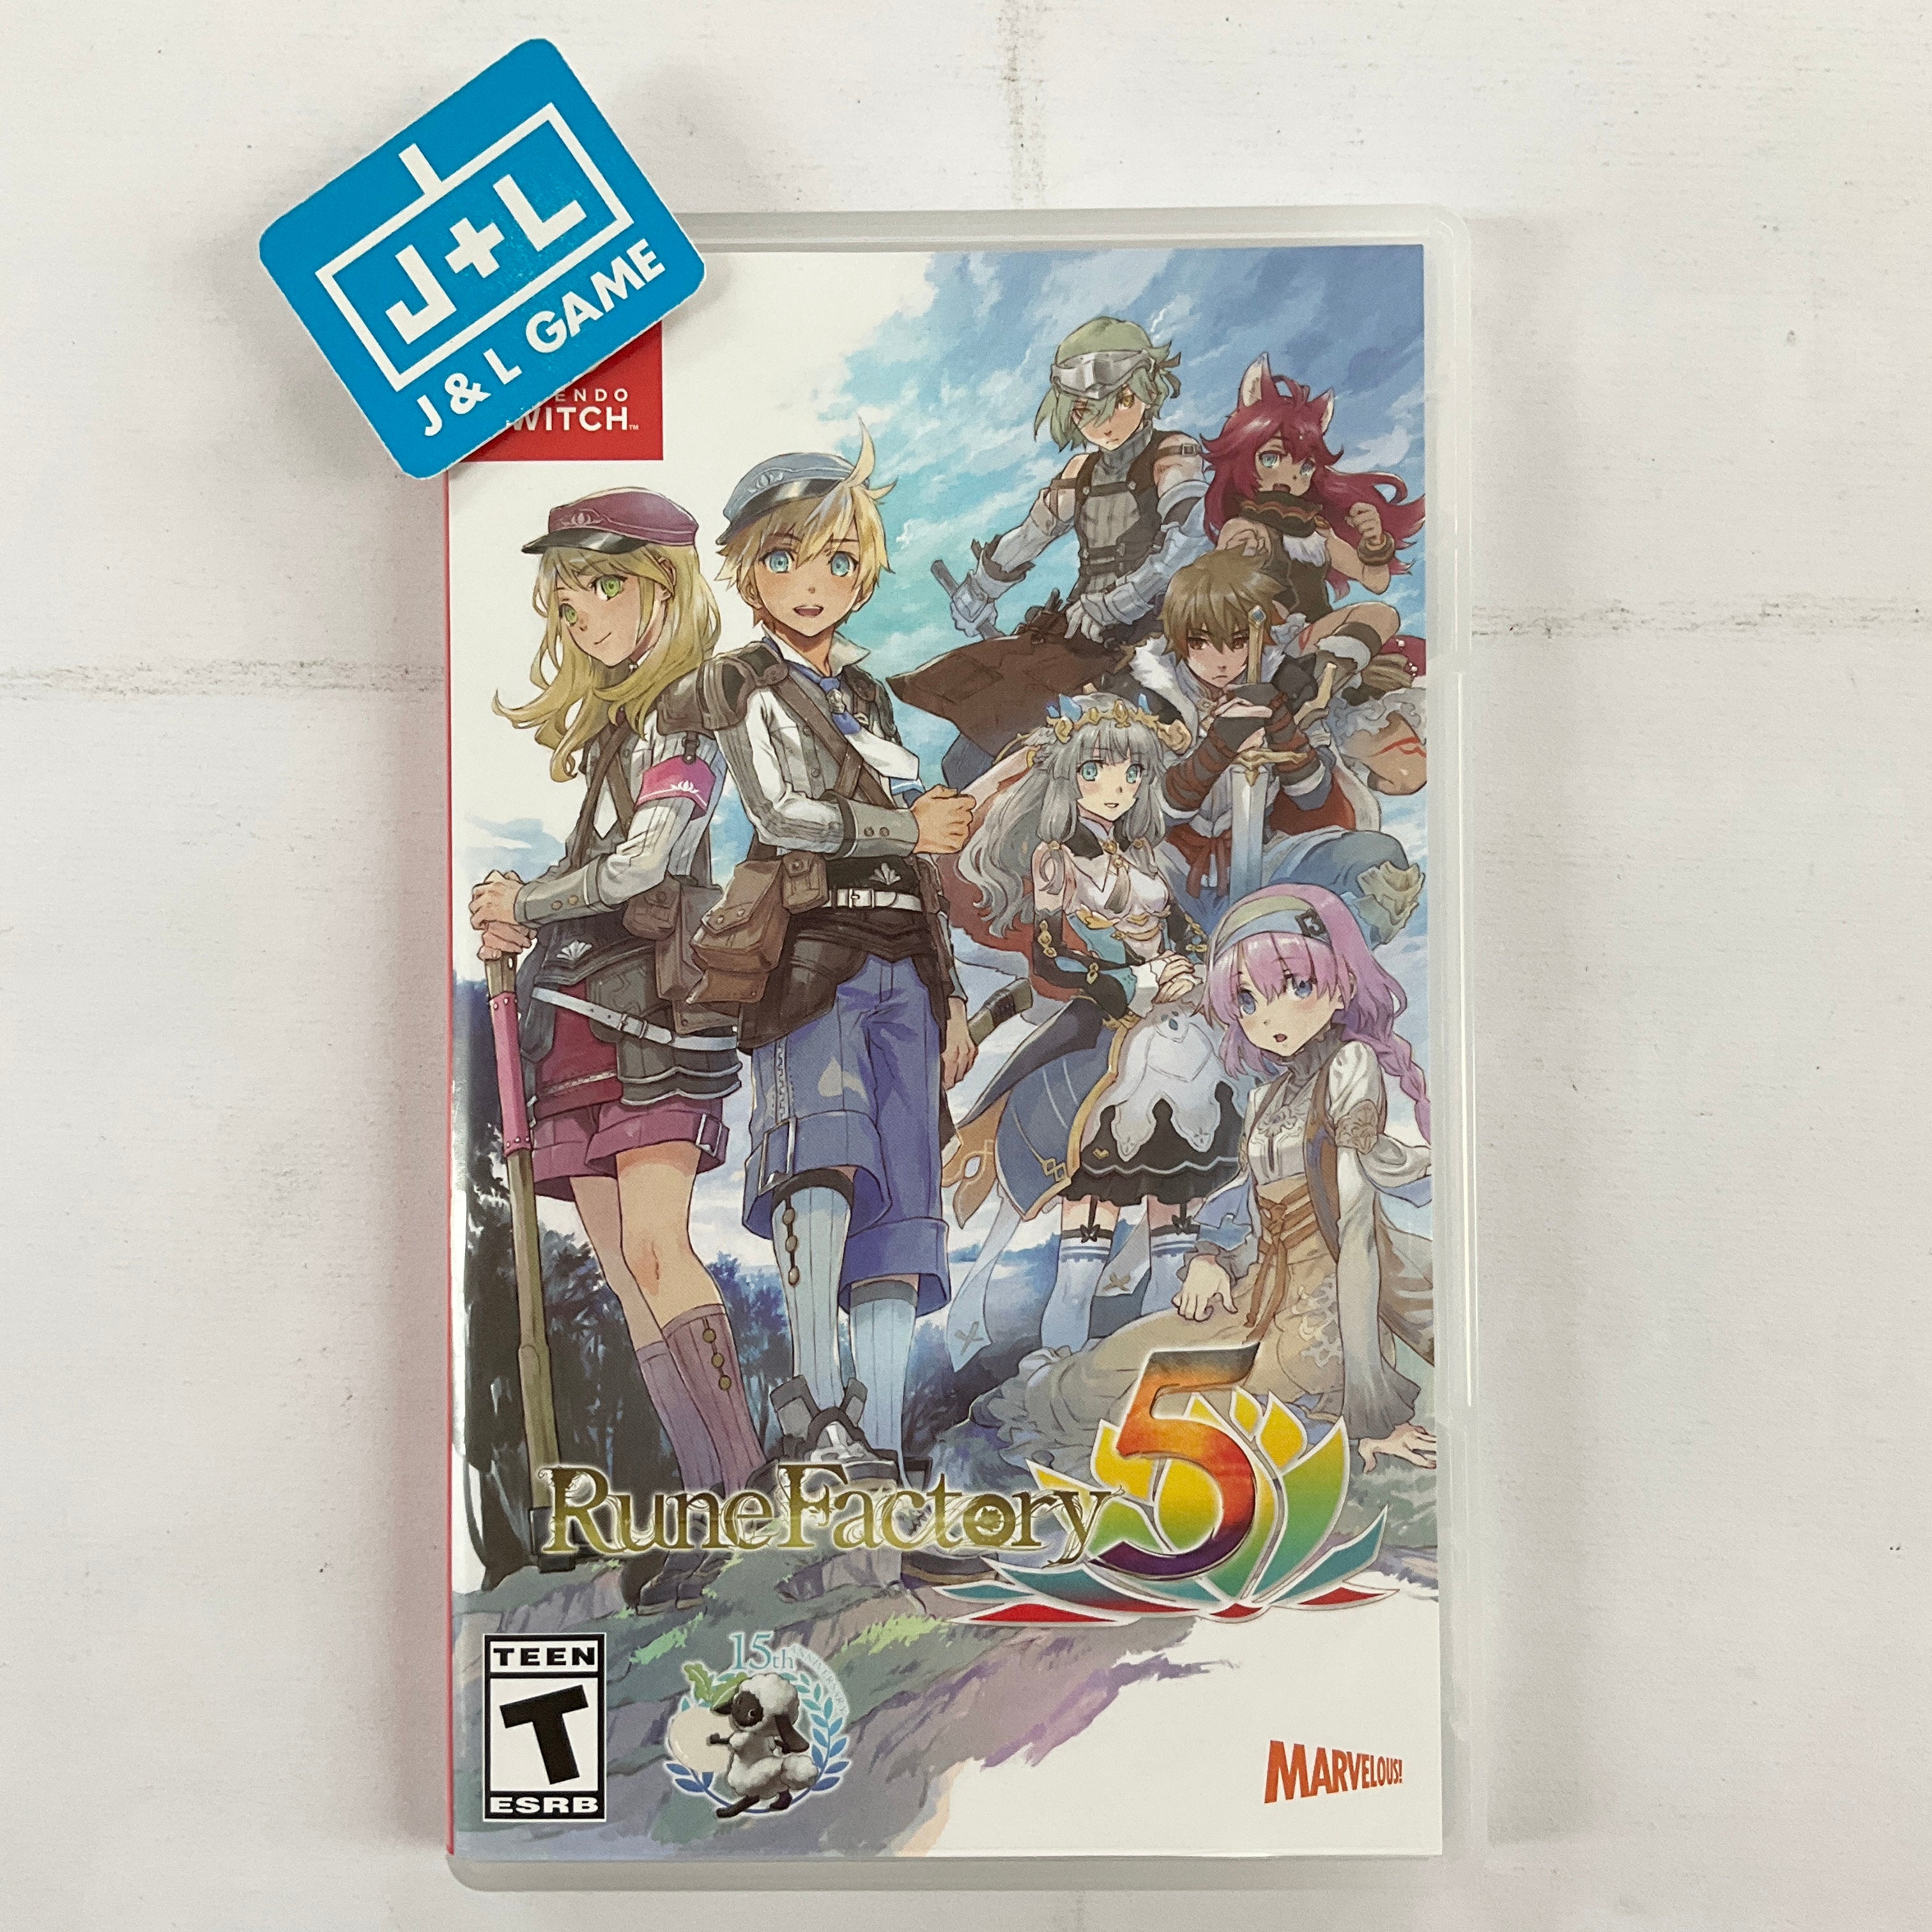 Rune Factory 5 - (NSW) Nintendo Switch [UNBOXING] Video Games XSEED Games   